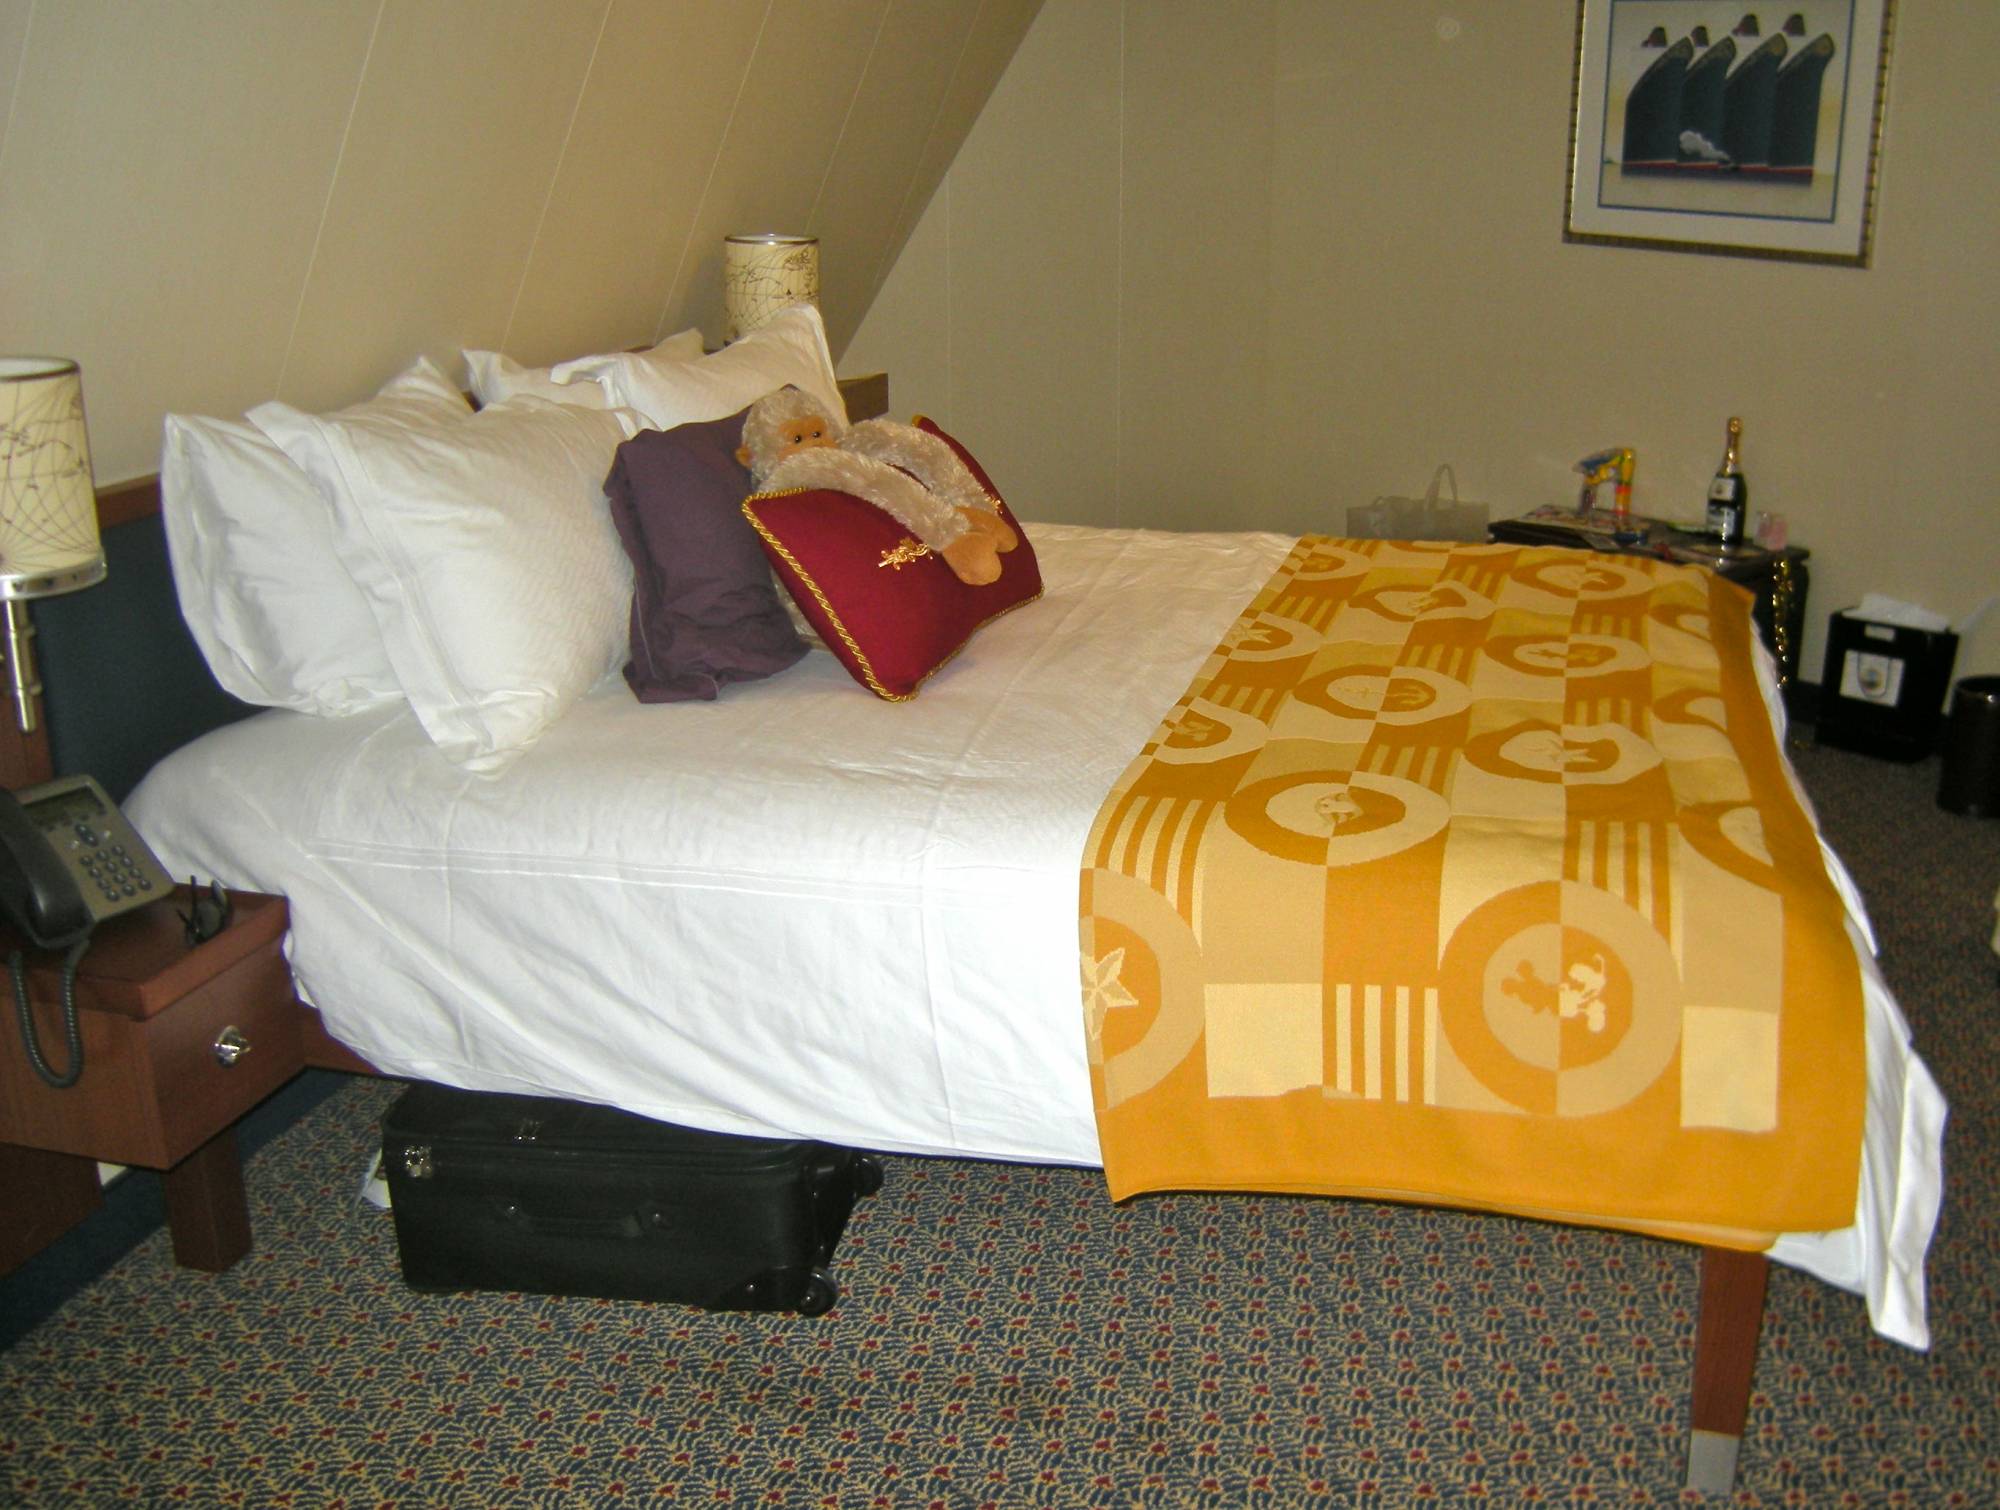 Disney Dream - Bed in Stateroom 8504 (cat. 9A)